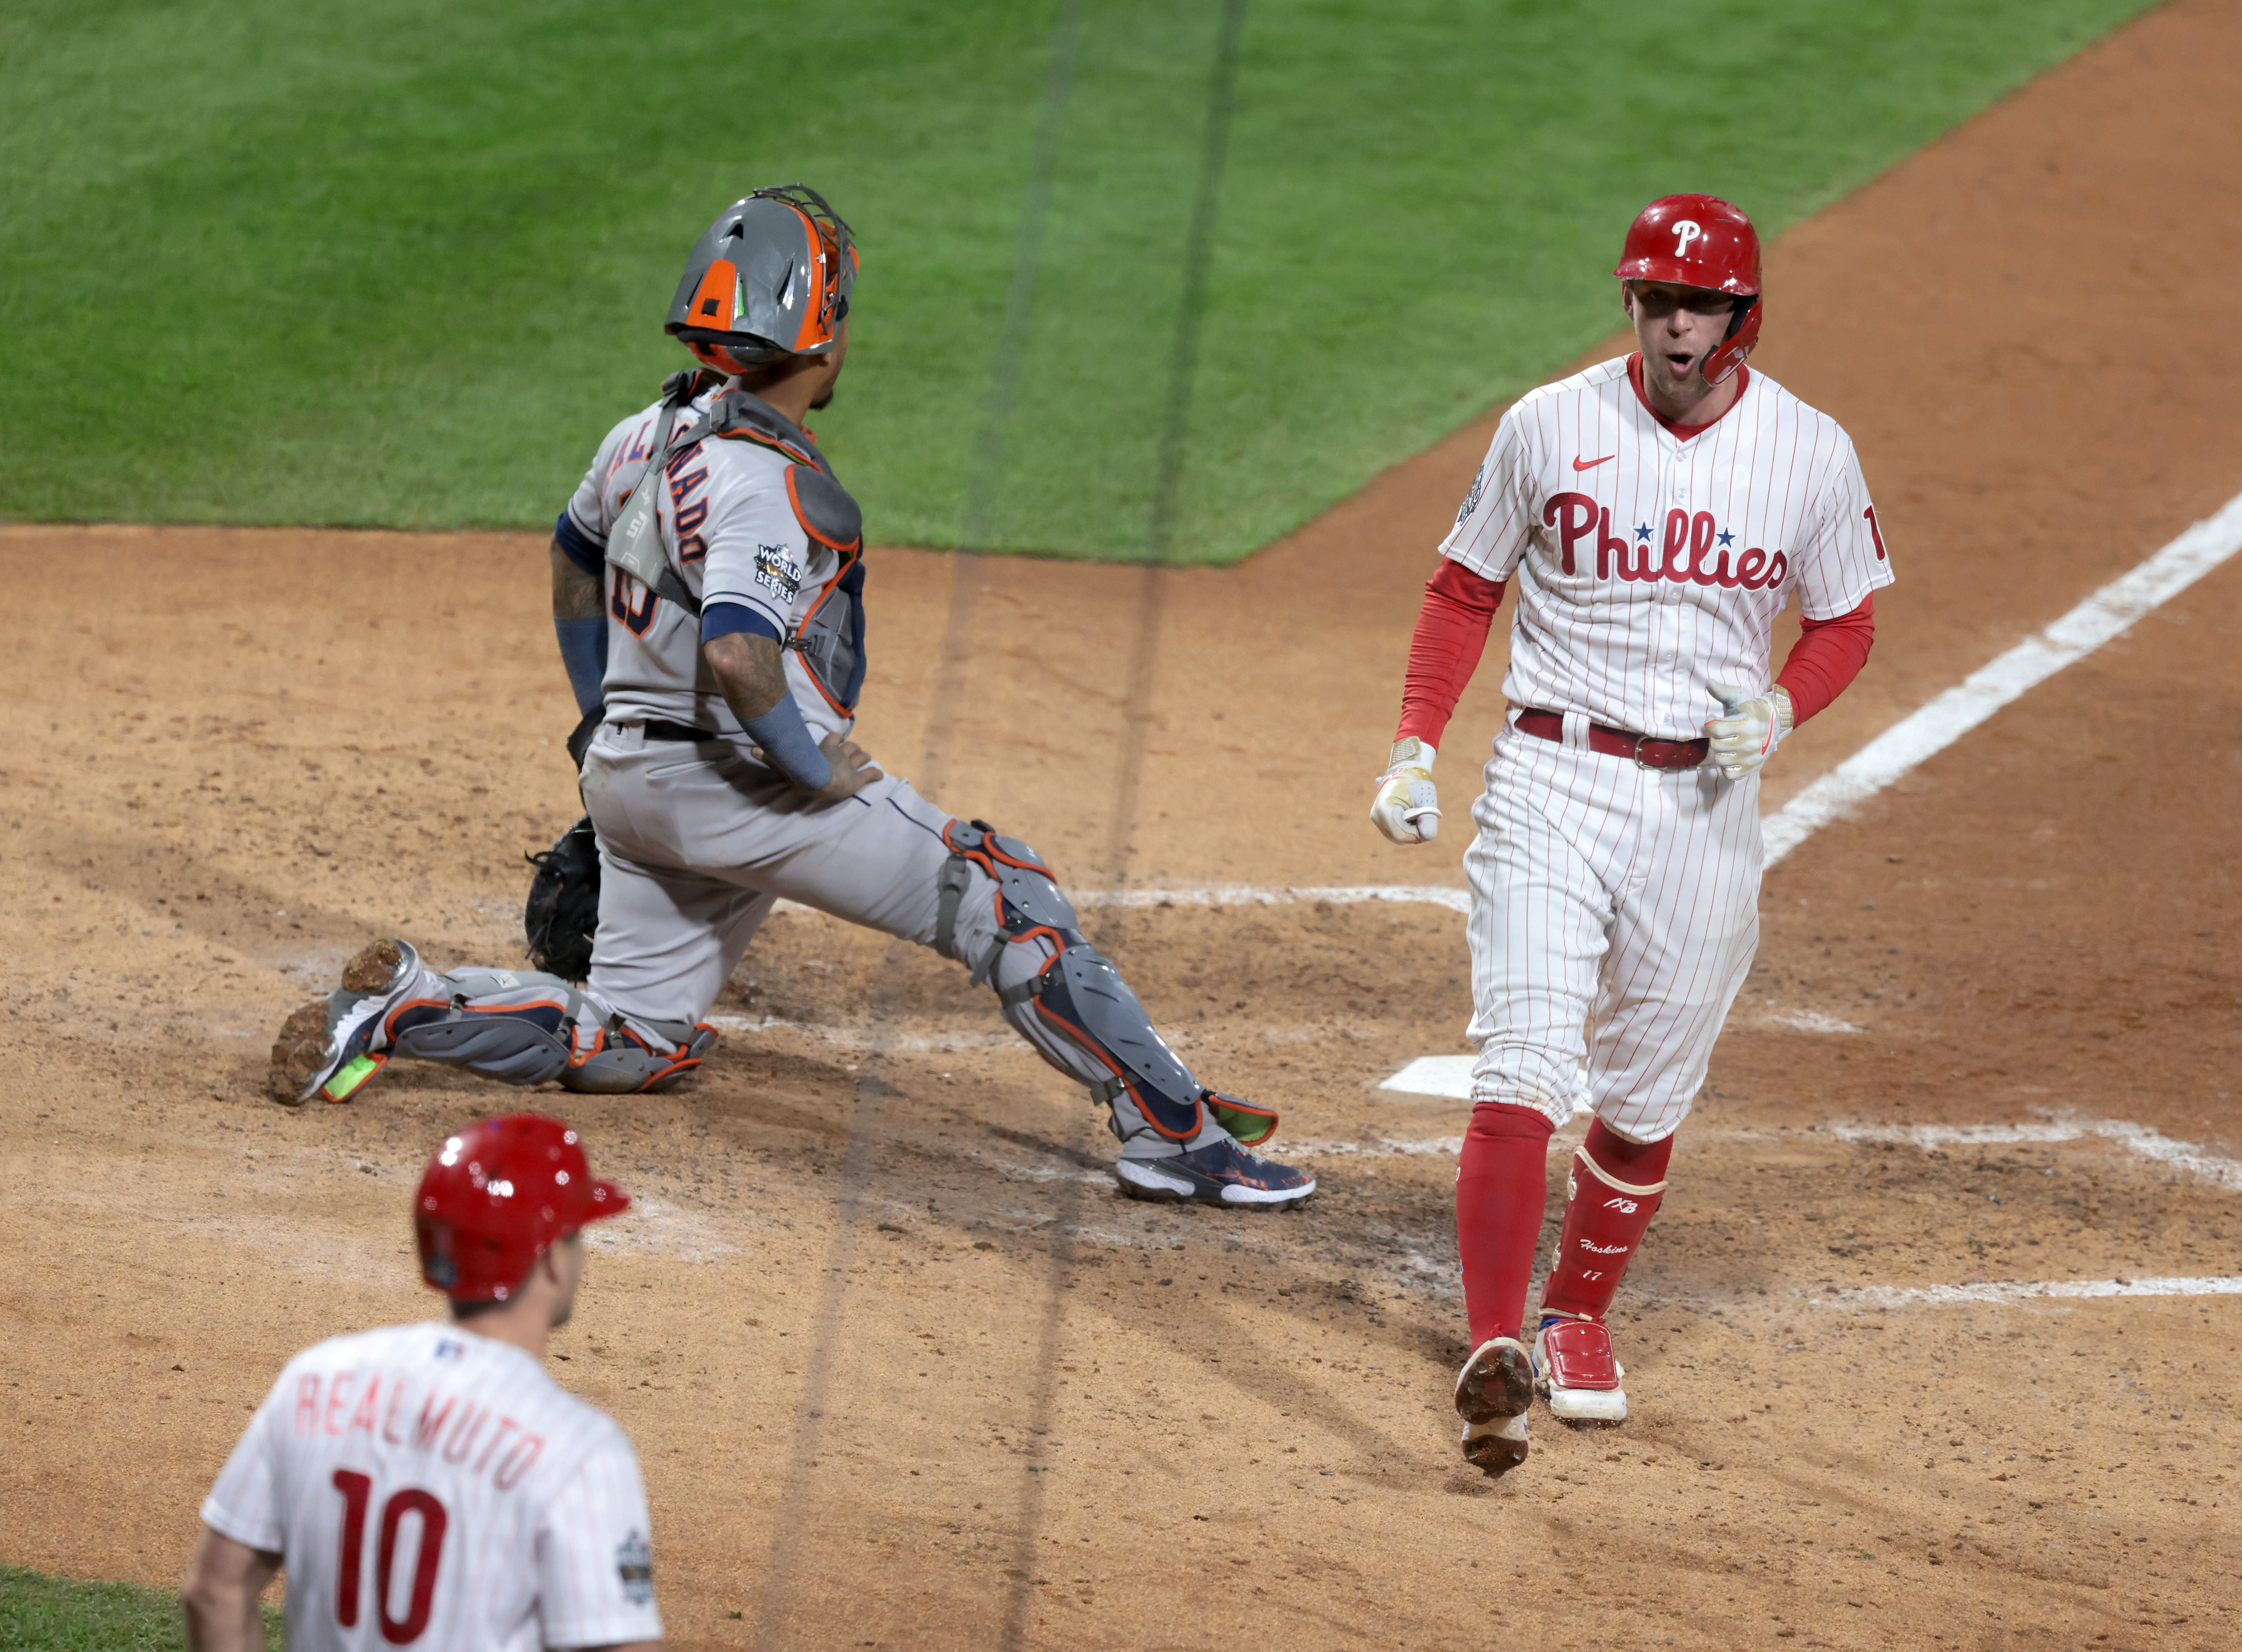 Rhys Hoskins (17) of the Philadelphia Phillies celebrates after hitting a home run vs.the Houston Astros in the fifth inning during Game 3 of the World Series at Citizens Bank Park, Tuesday, Nov. 1, 2022.